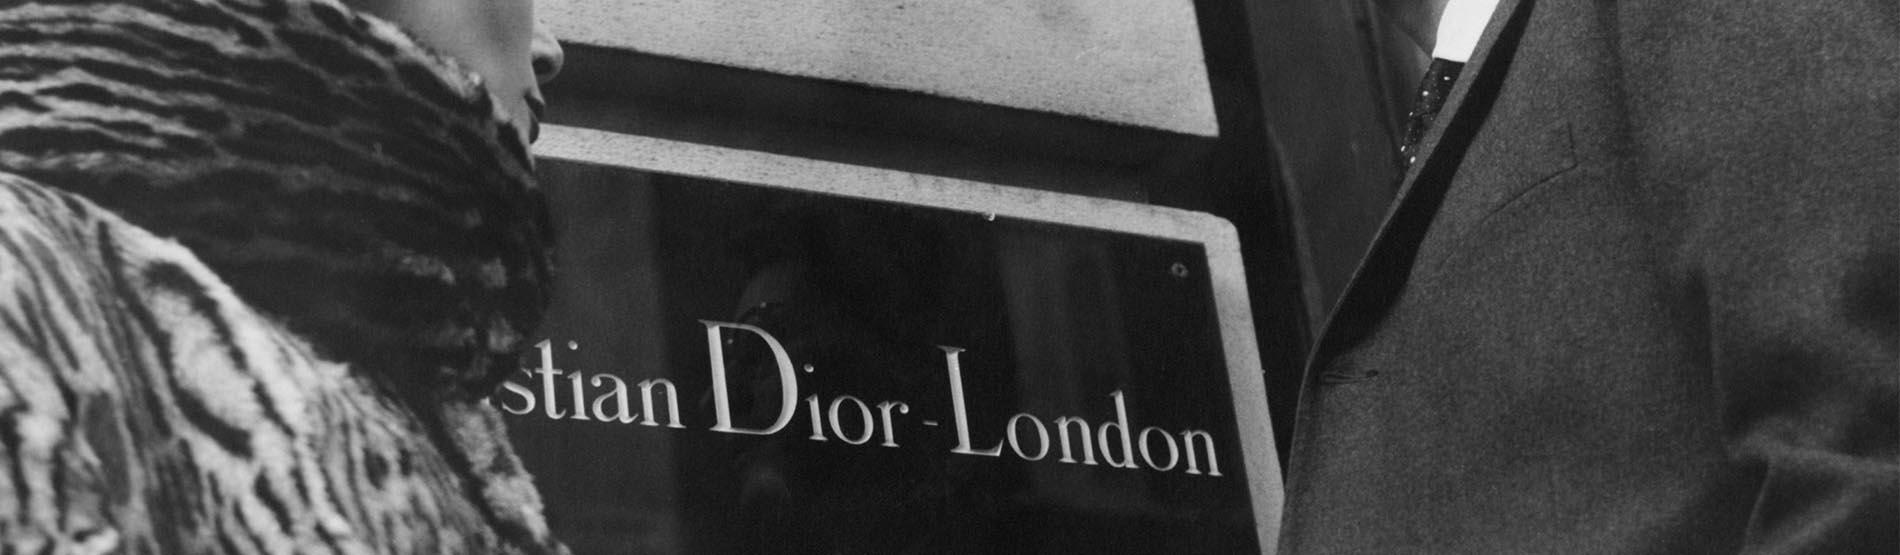 Shoppers looking at Christian Dior boutique sign